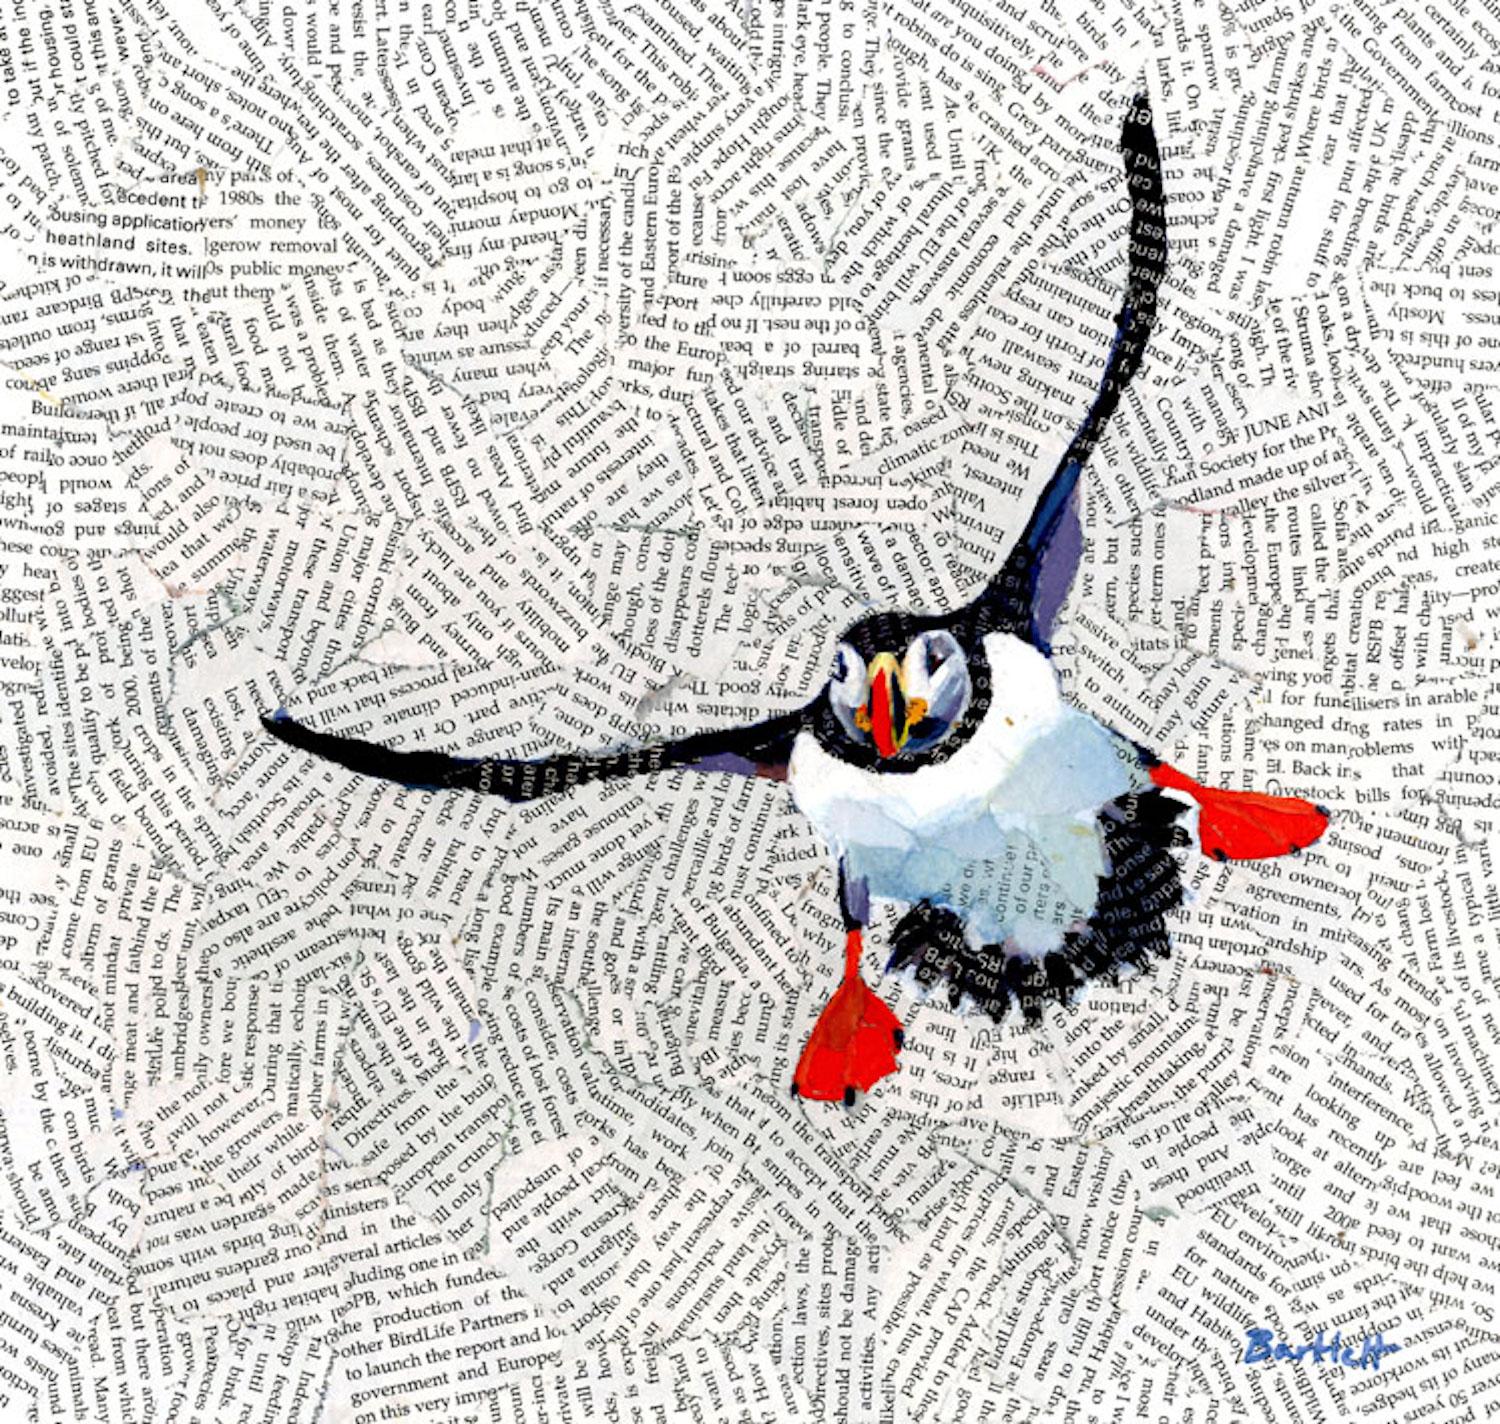 Overal Size: H85 x W86.5

Paul Bartlett. Puffin landing. Puffin Print

A puffin comes in to land, wings and feet outstretched to slow its descent. Paul Bartlett is a highly acclaimed artist who has won many awards for his original depictions of